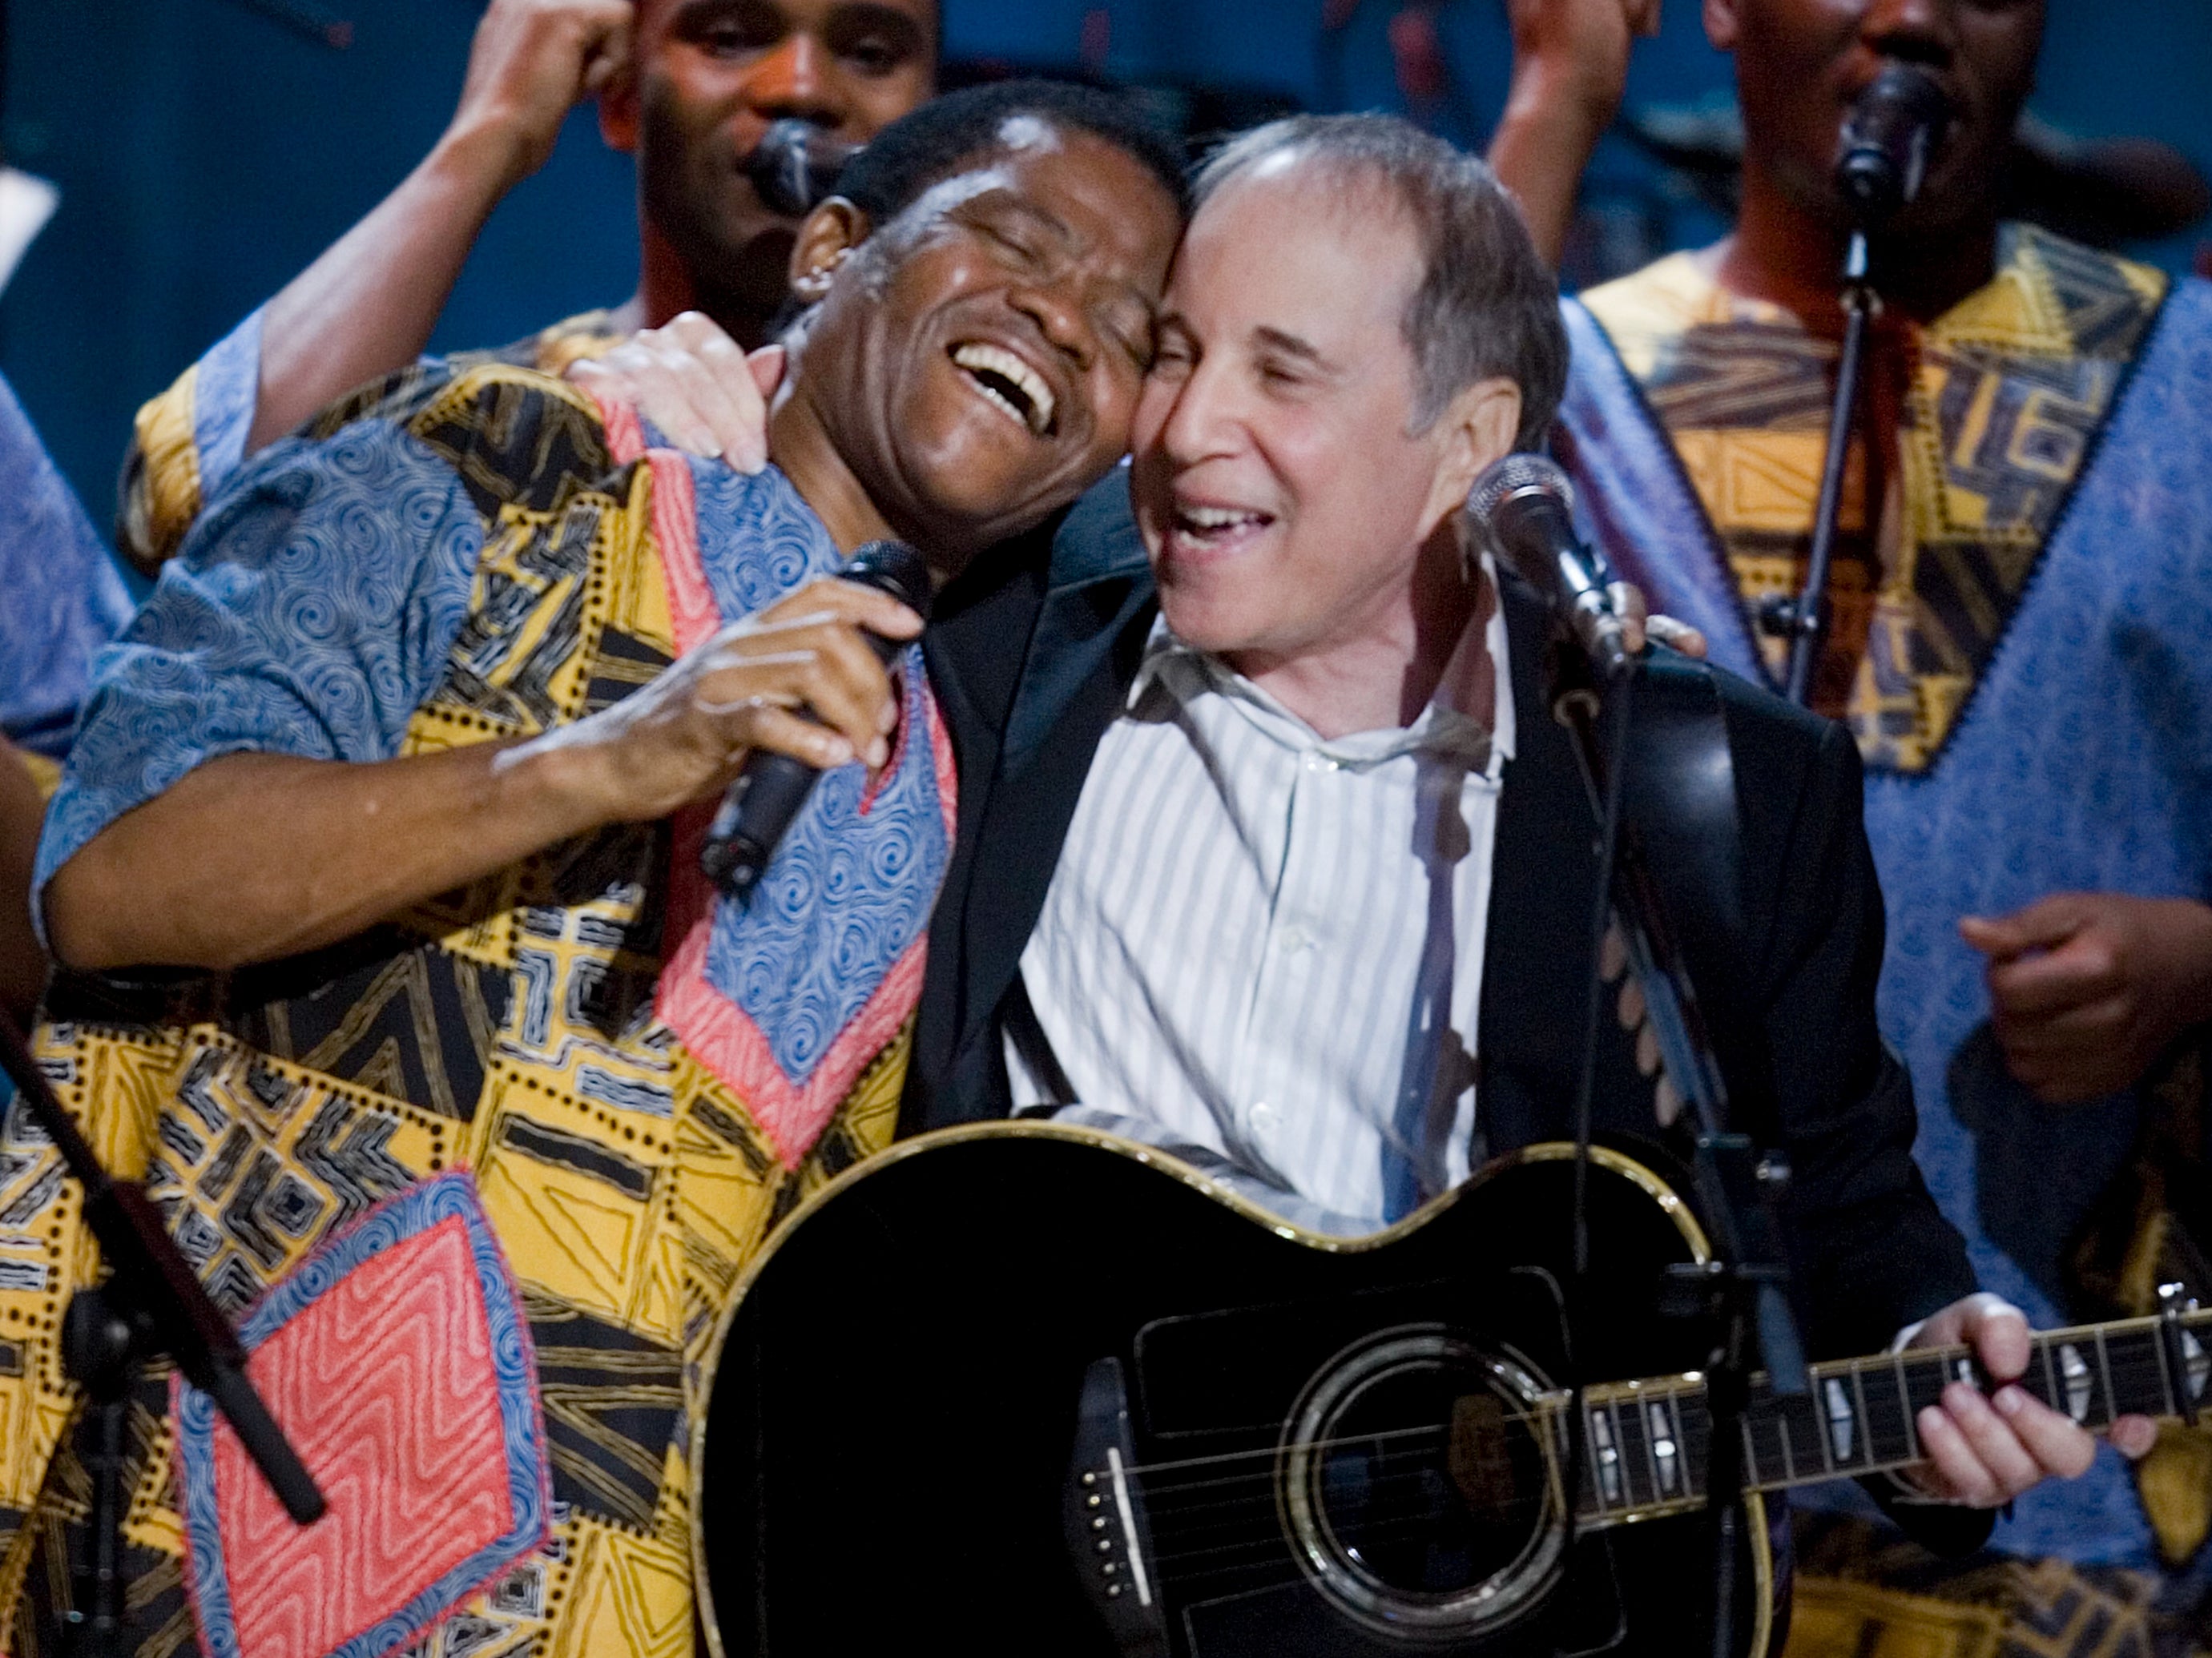 Still crazy after all these years: Joseph Shabalala of Ladysmith Black Mabazo and Paul Simon performing together in 2007